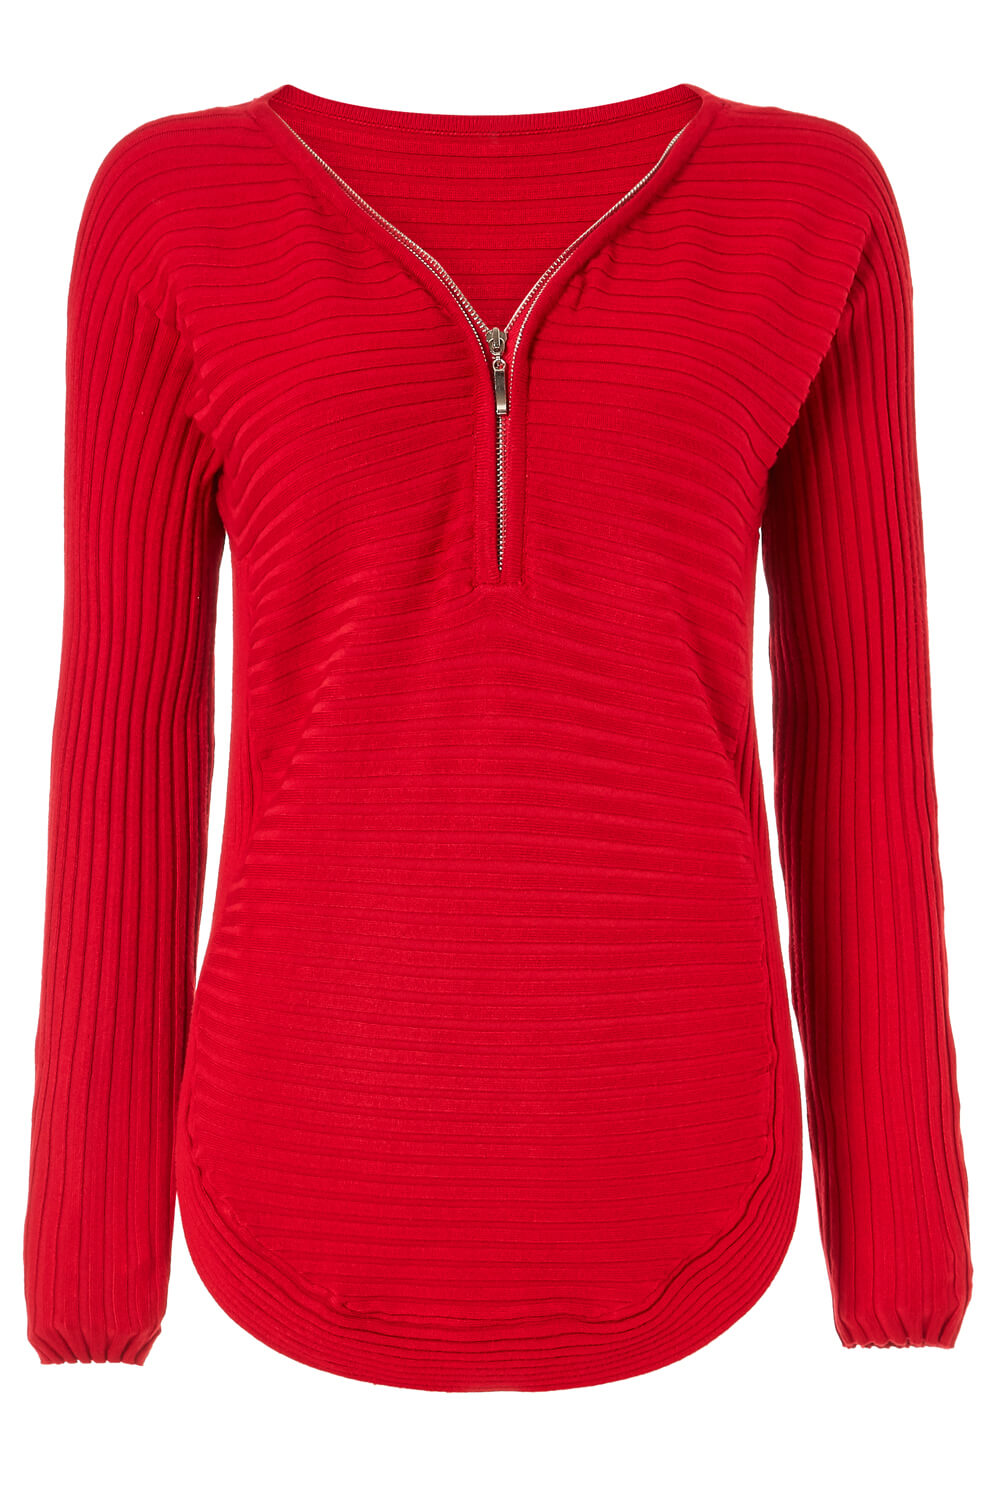 Red Zip Front V Neck Jersey Long Sleeve Top, Image 5 of 5